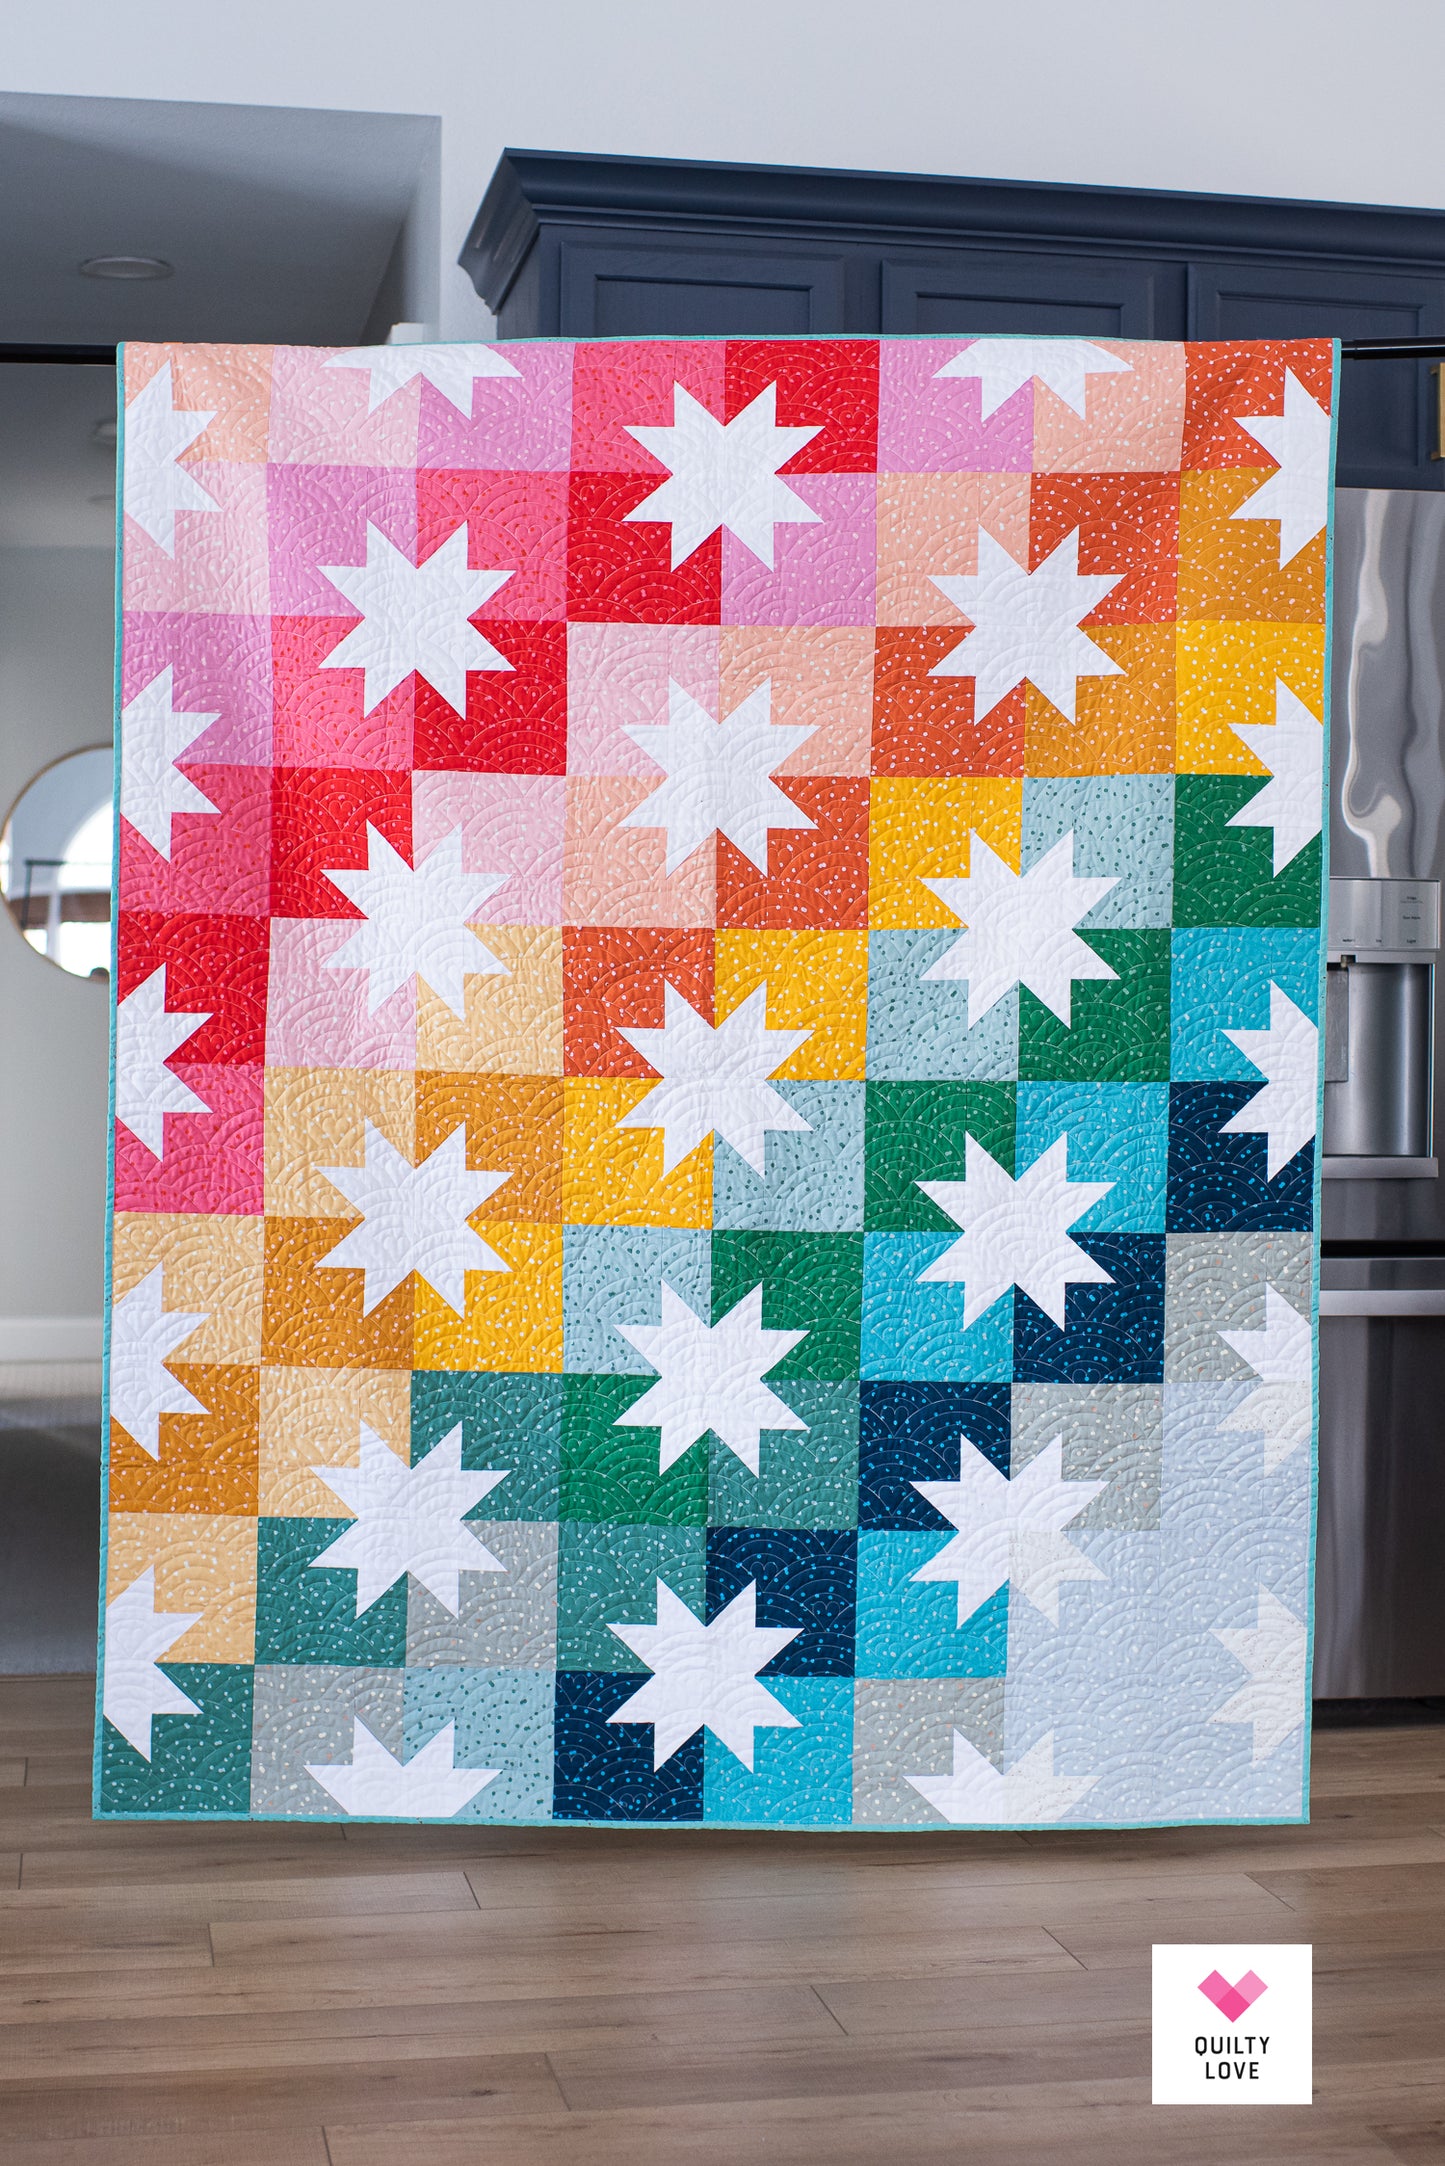 Star Pop II Quilt - The Hole Punch Dot rainbow one